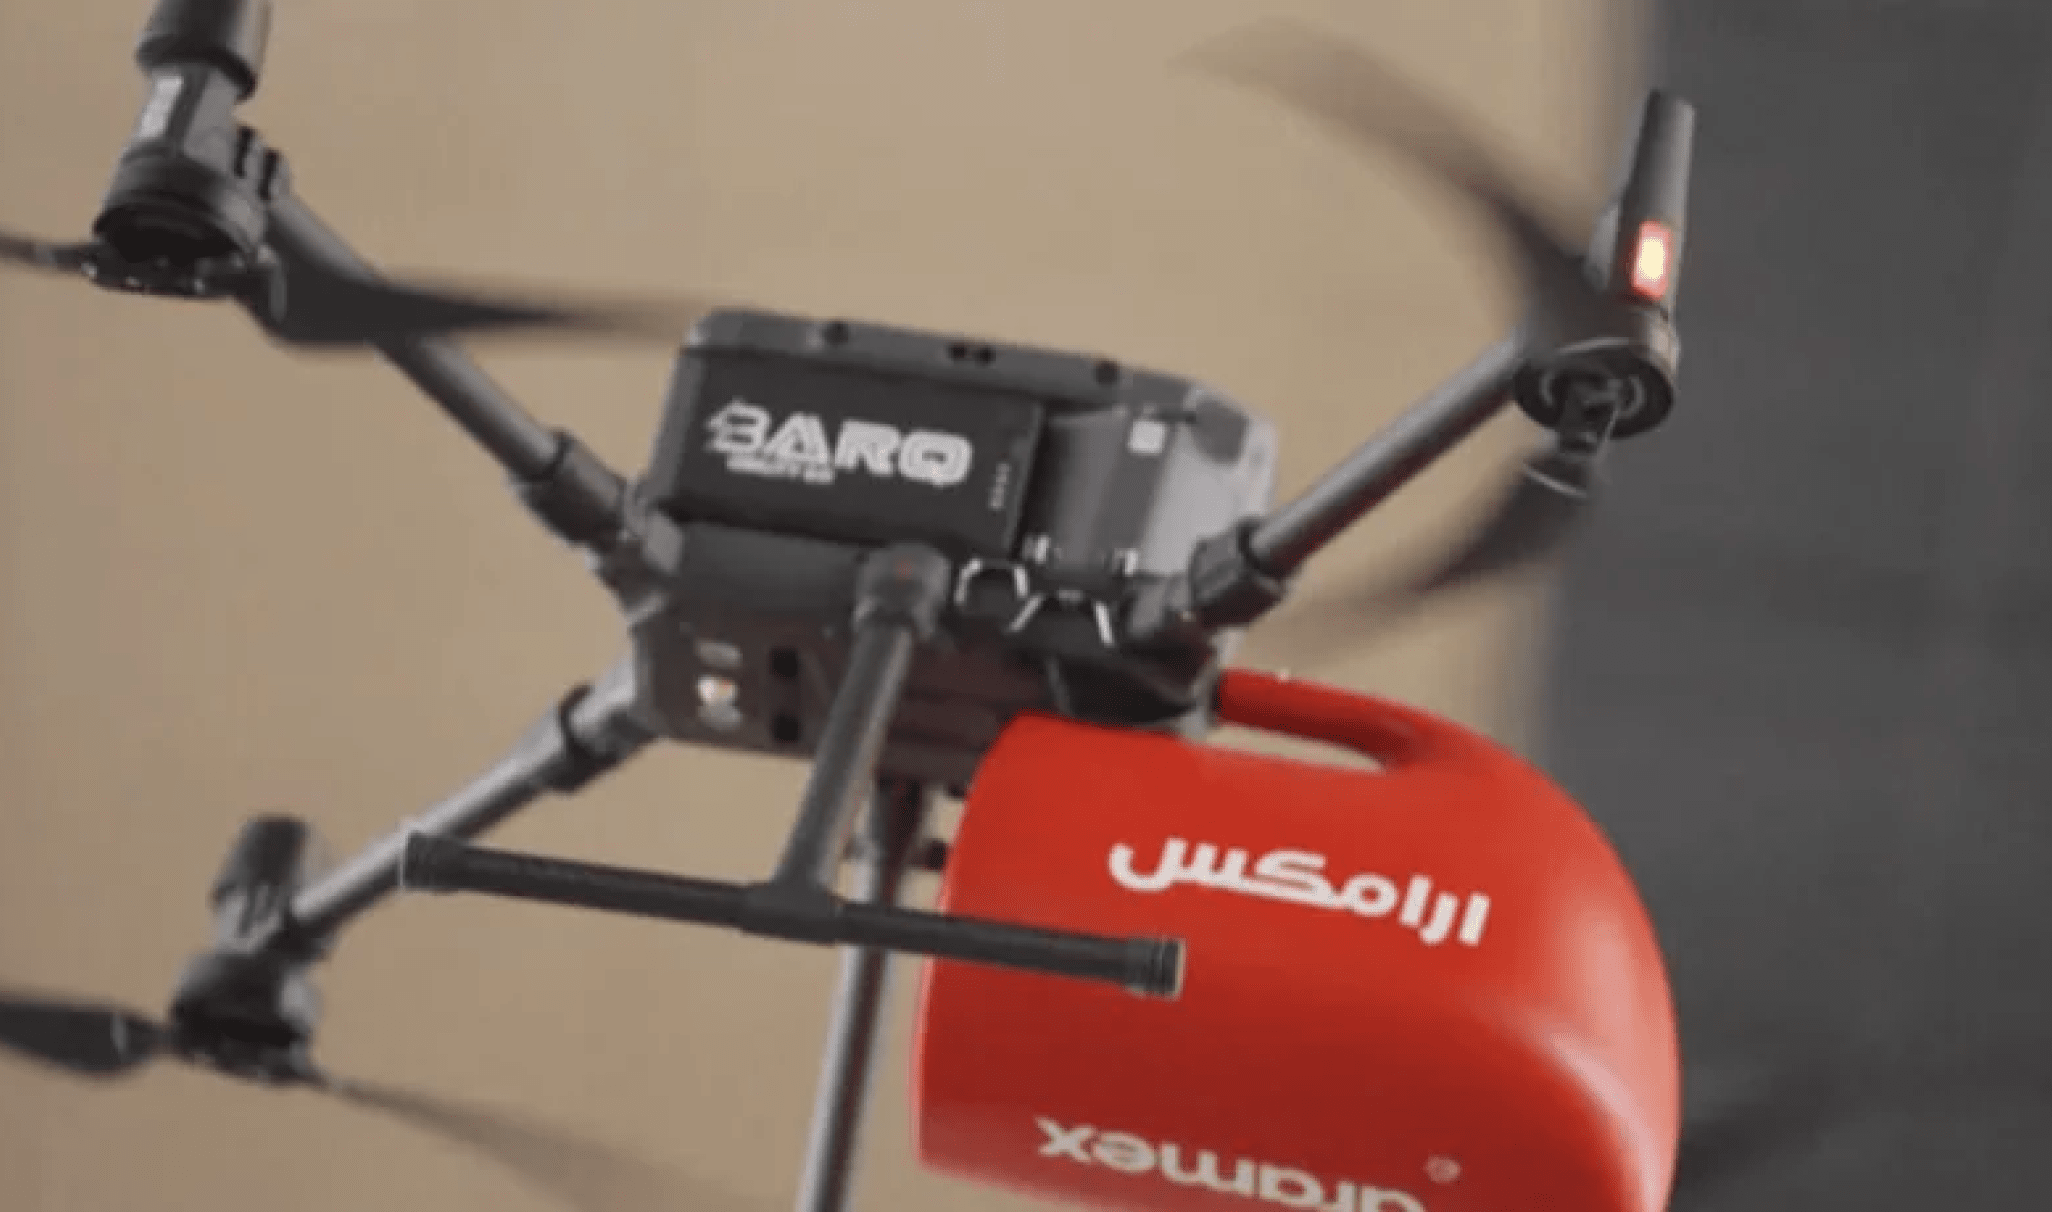 Successful testing of its drone and roadside bot deliveries in Dubai